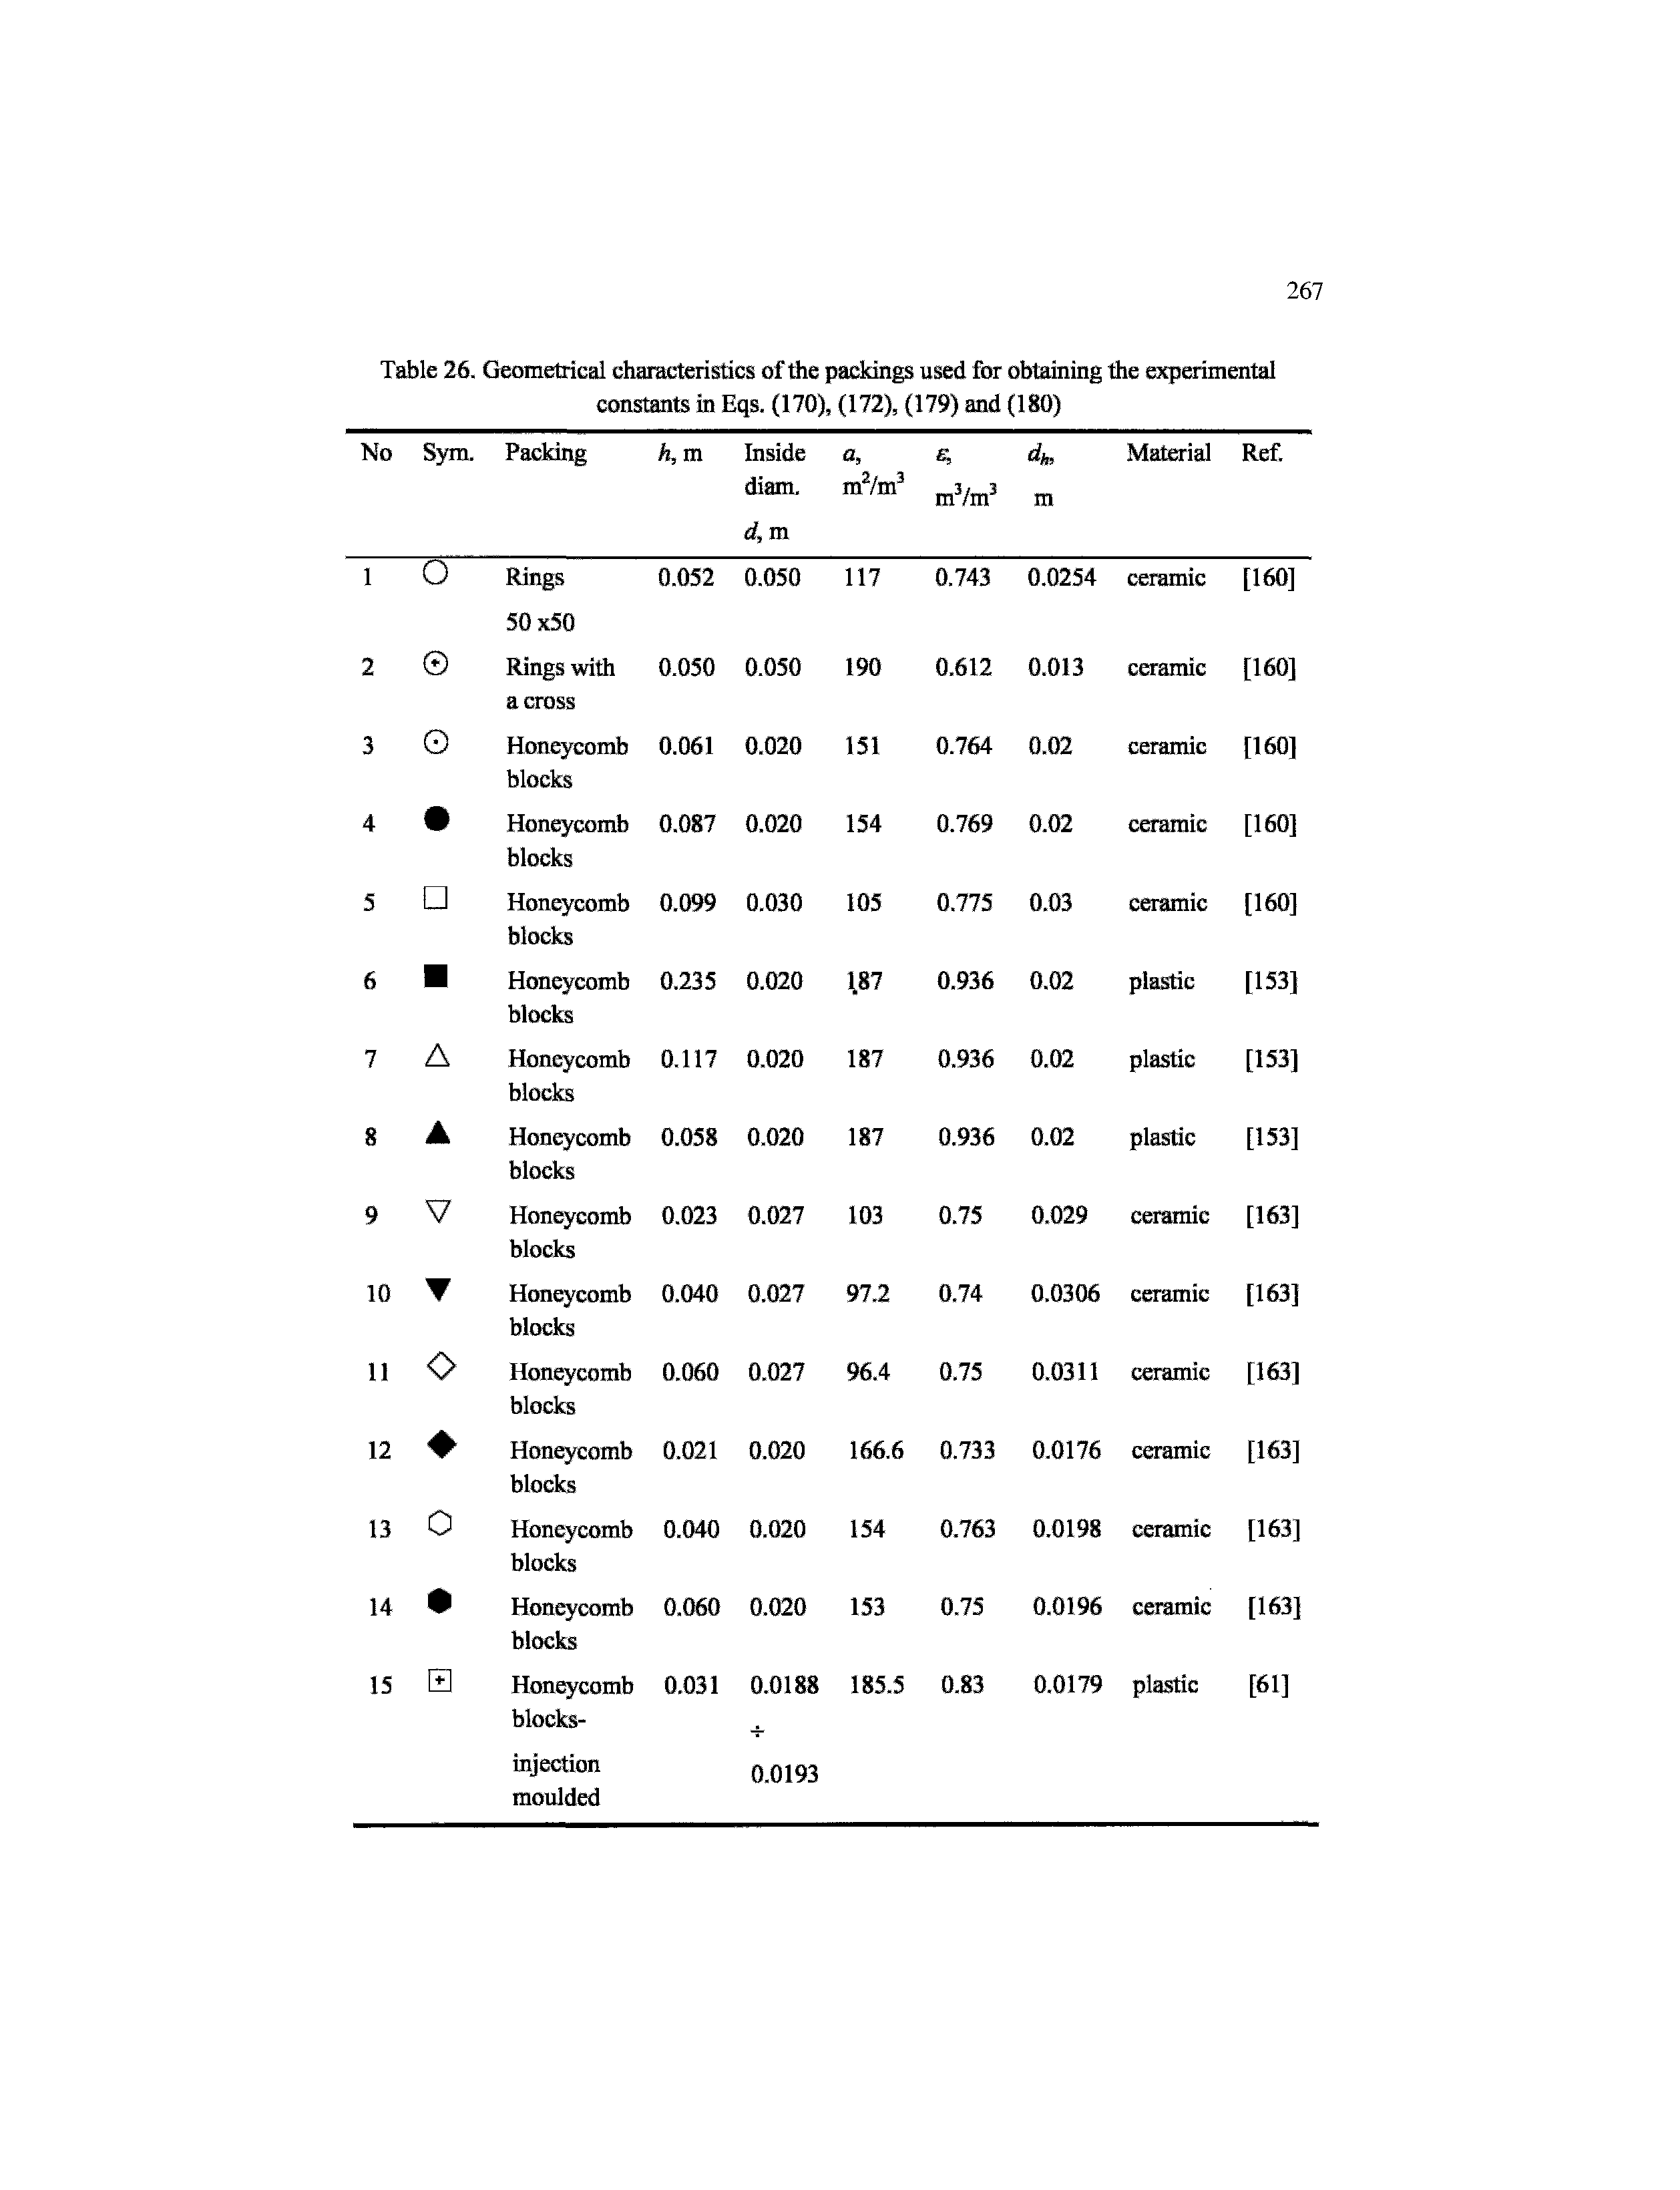 Table 26. Geometrical characteristics of the packings used for obtaining the experimental constants in Eqs. (170), (172), (179) and (180)...